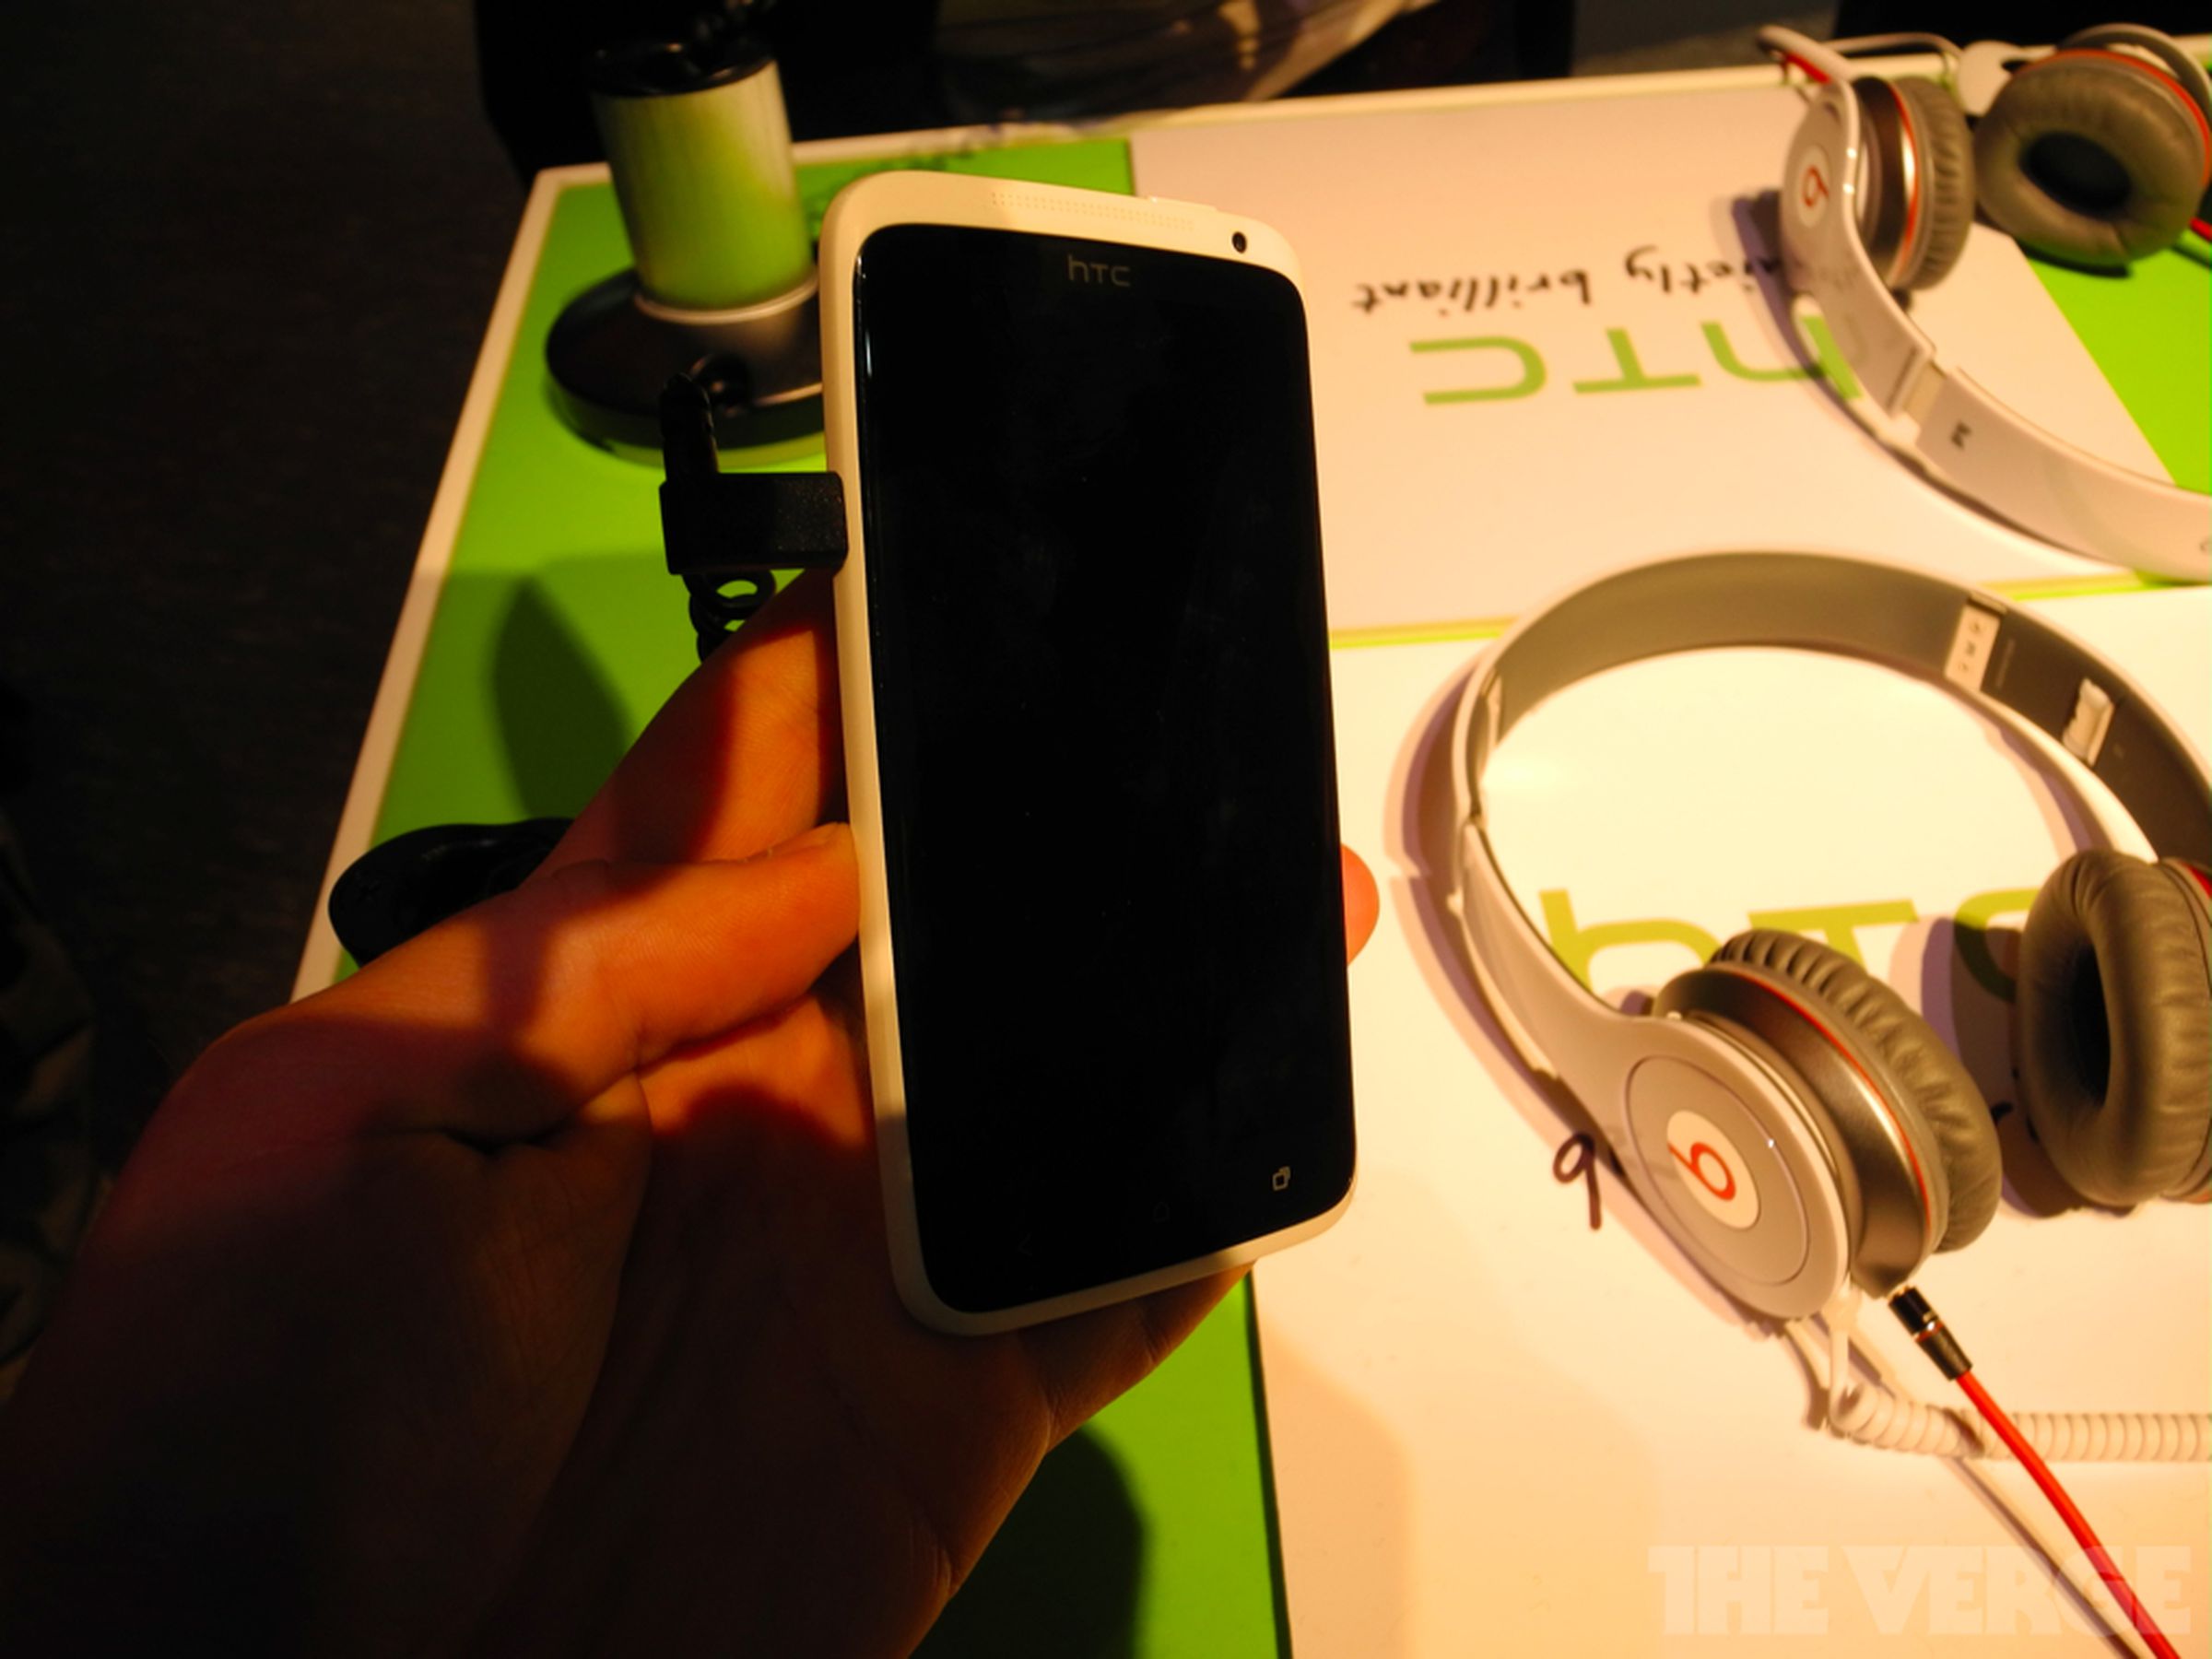 HTC One X first hands-on